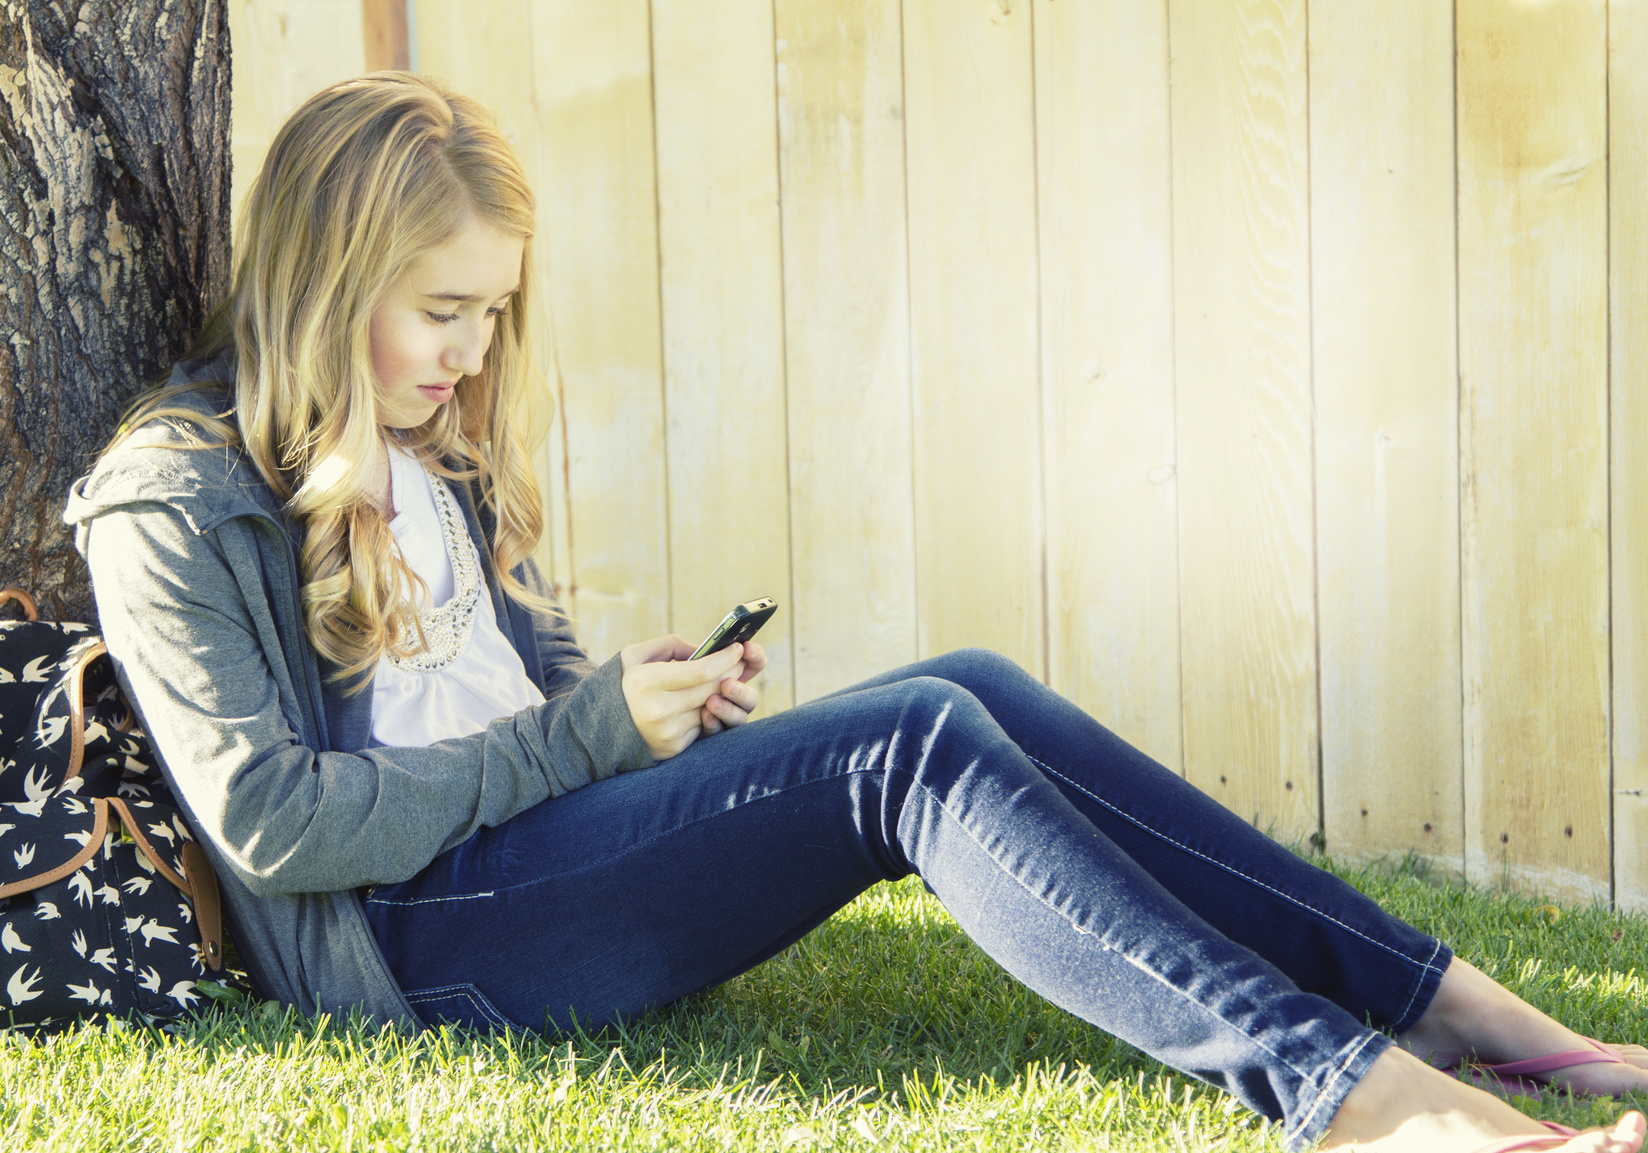 Teenage girl using a cell phone